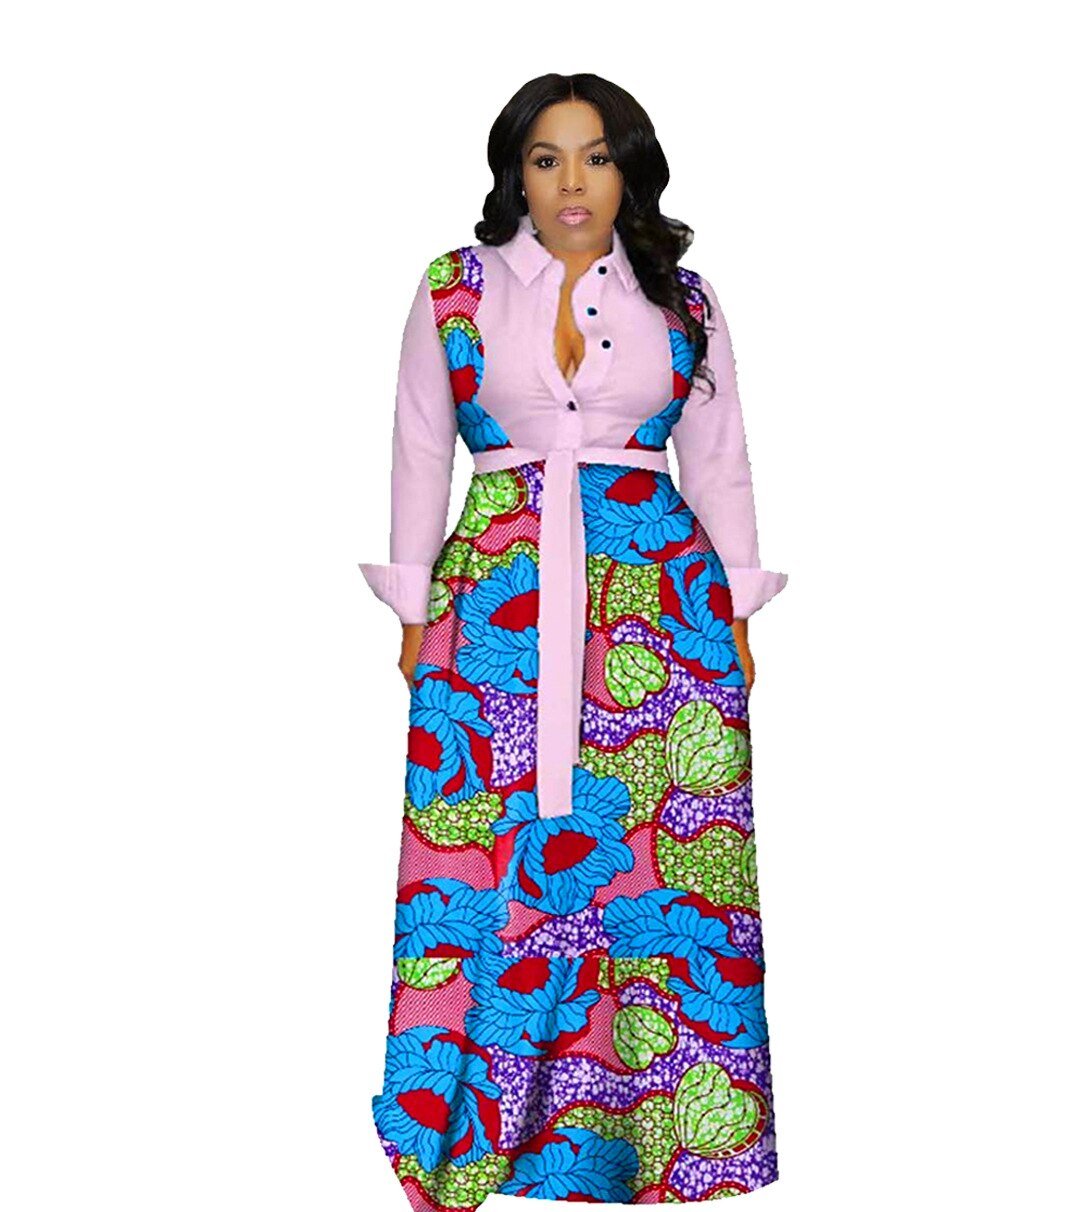 Multicolored African Dresses for Women in New Muslim Fashion - Abayas, Dashikis, Kaftans, and Long Maxi Dresses - Flexi Africa - Flexi Africa offers Free Delivery Worldwide - Vibrant African traditional clothing showcasing bold prints and intricate designs